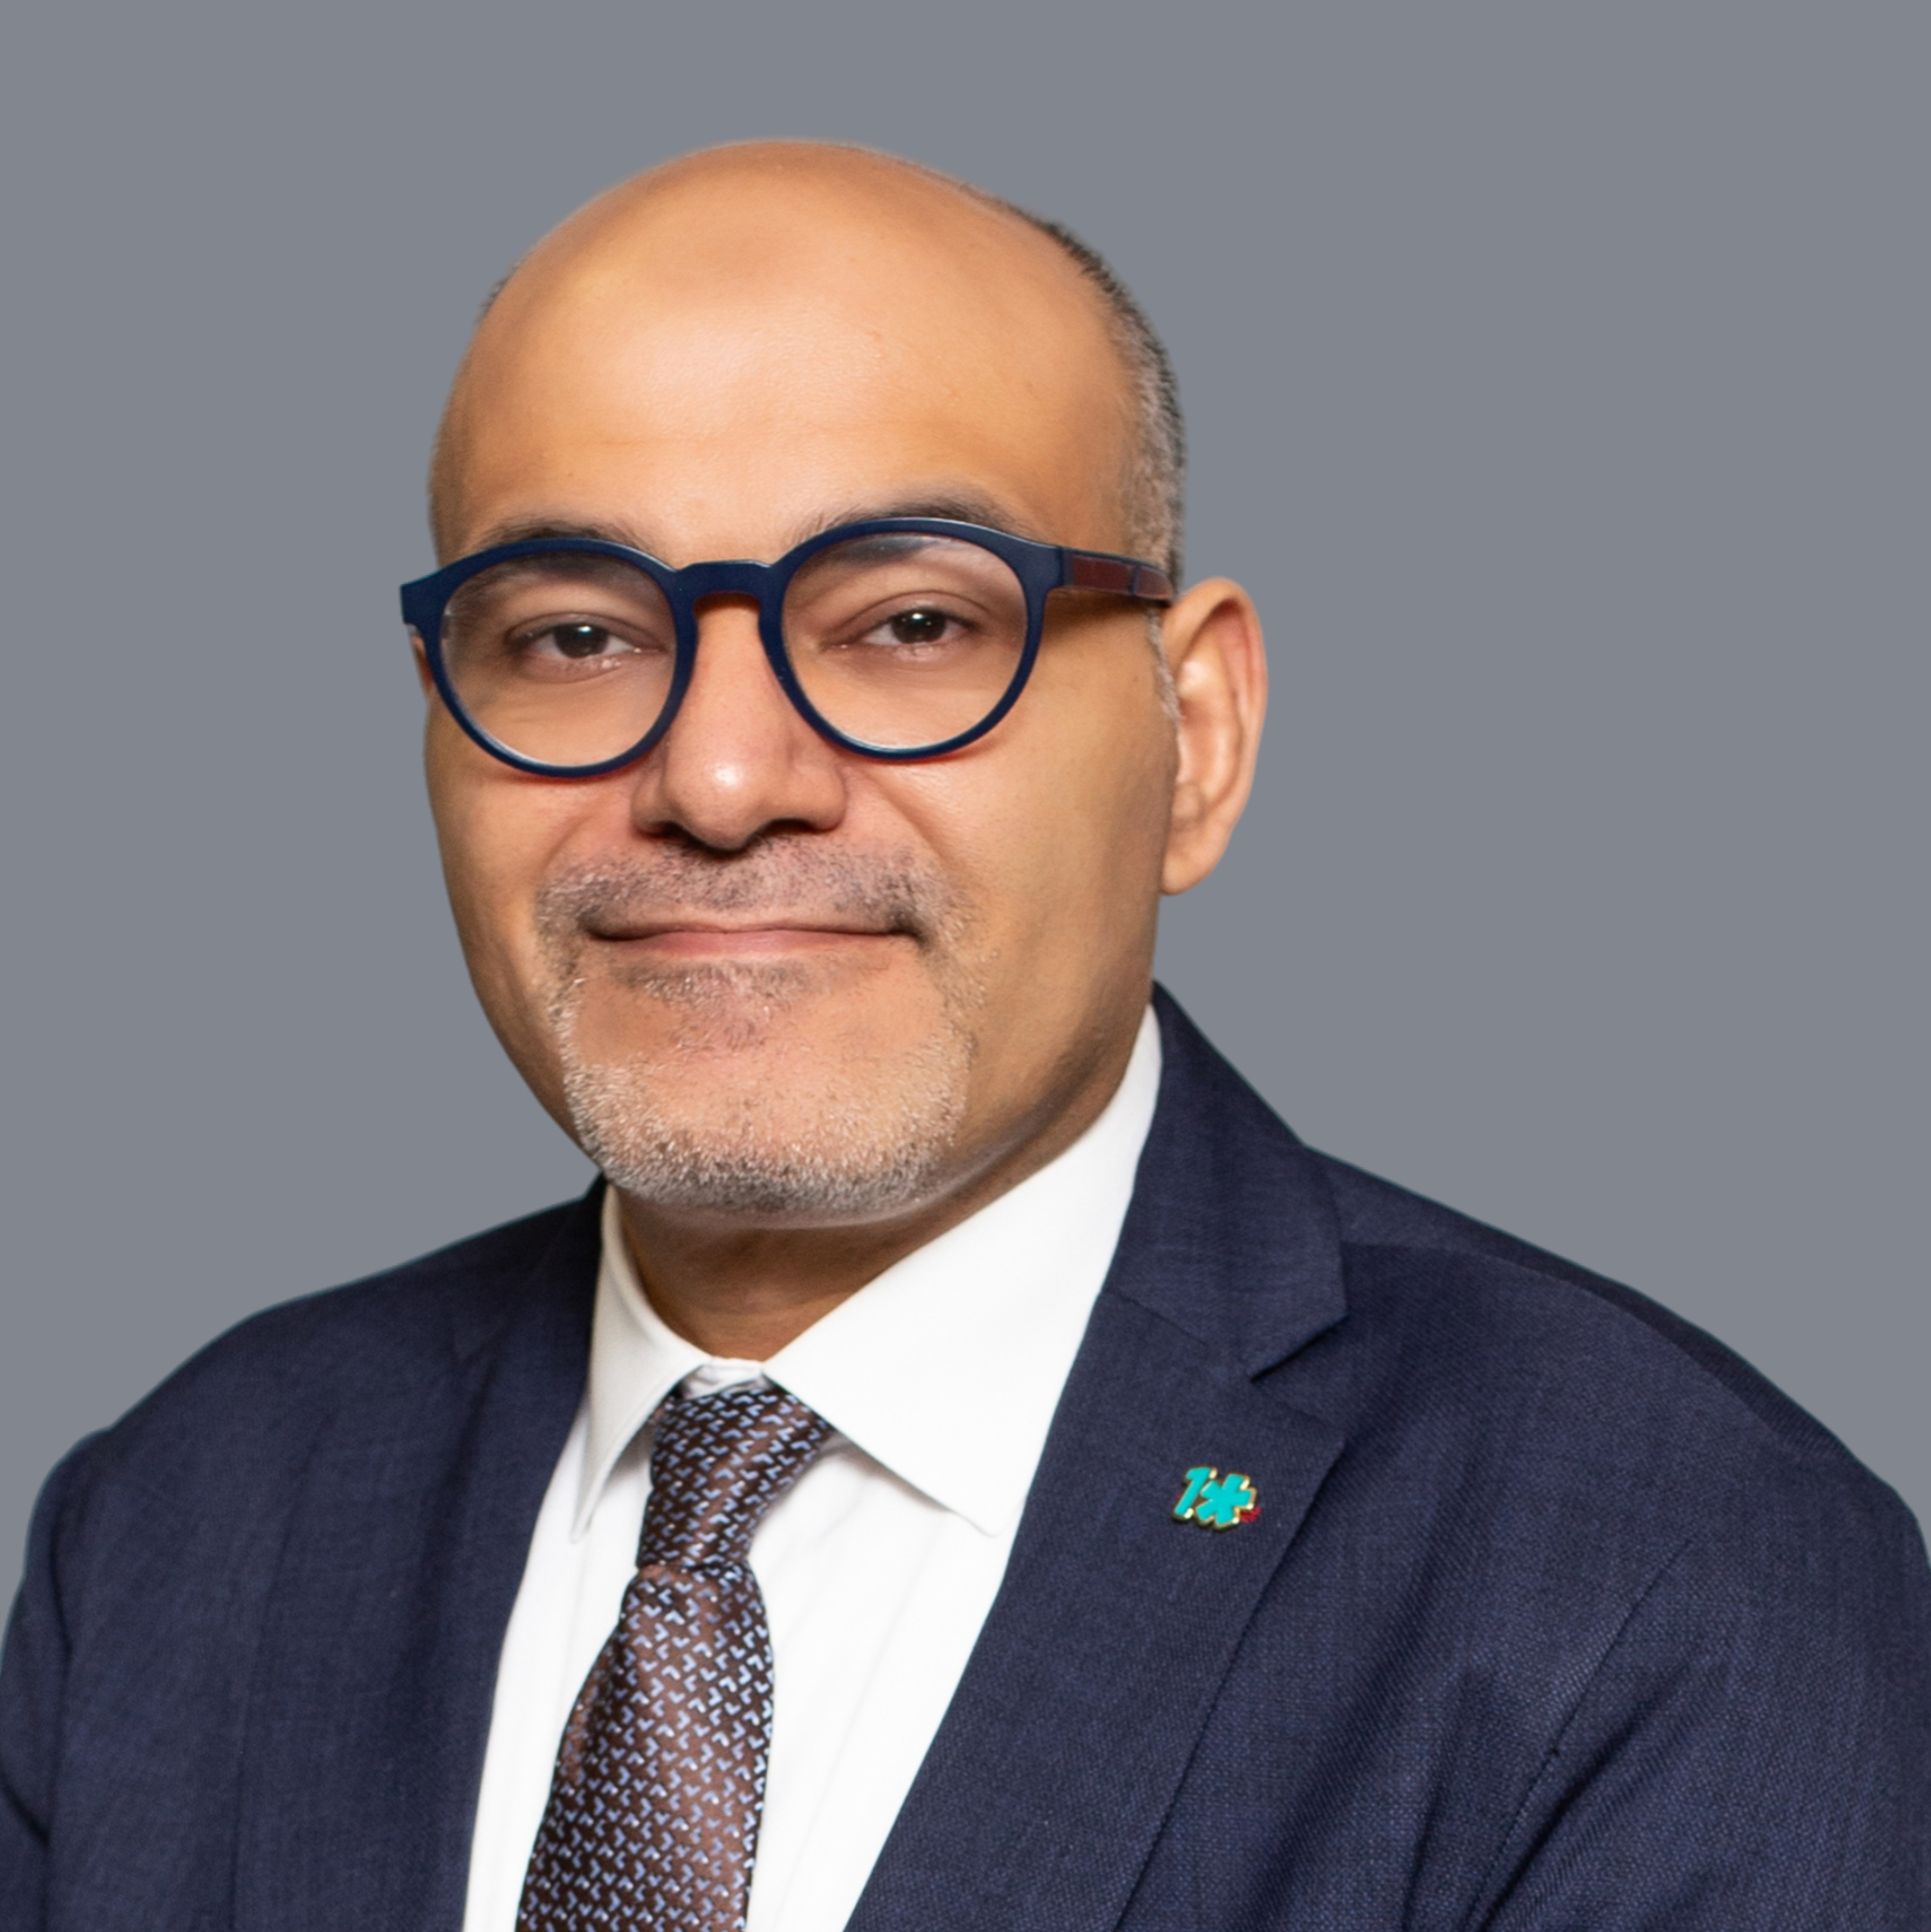 Dr. Ahmed Ebied